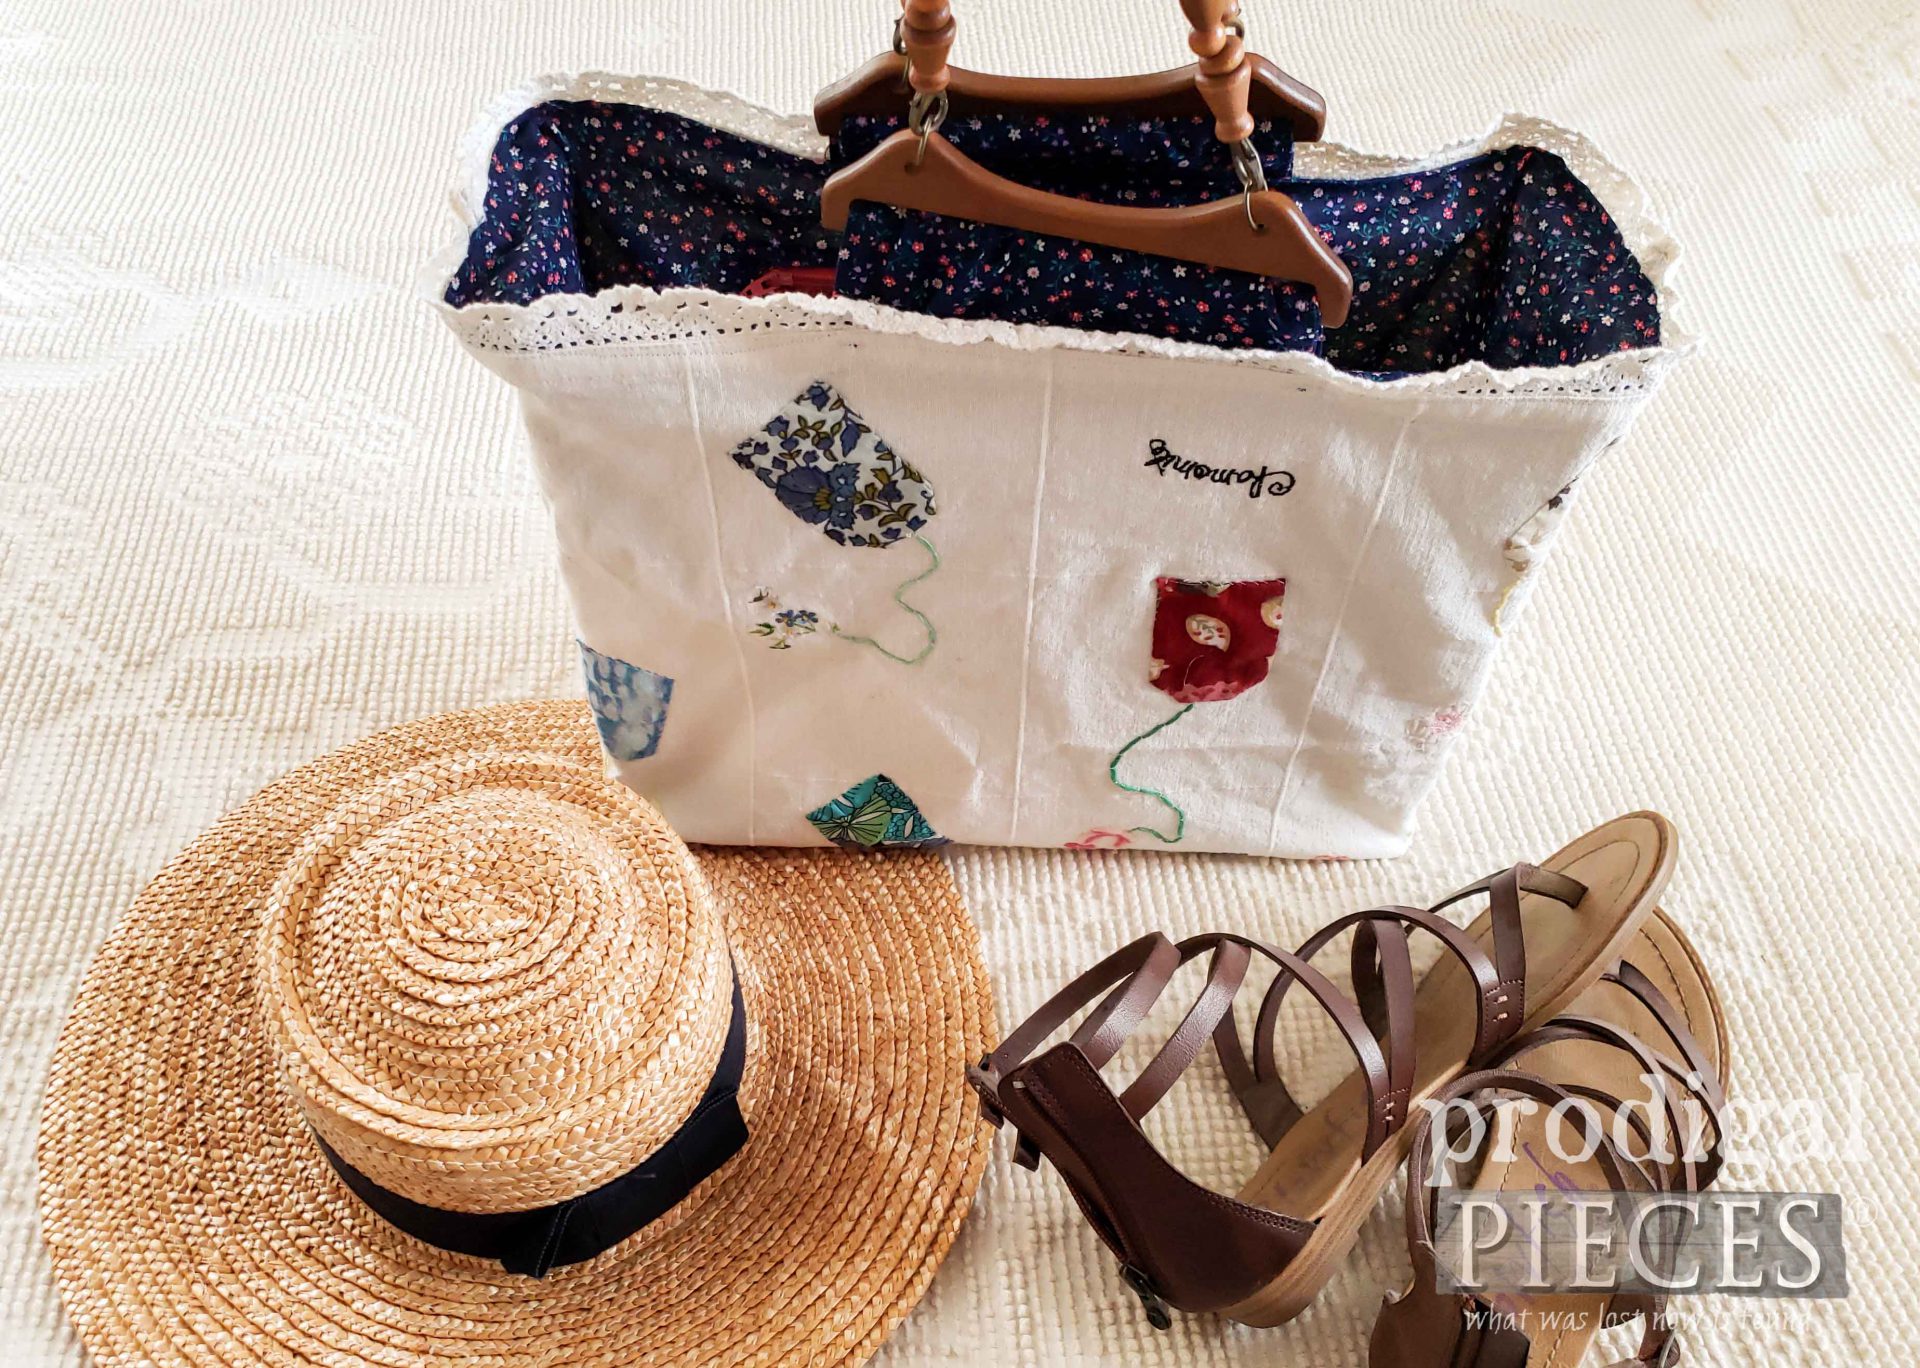 Vintage Embroidery Tote Bag by Larissa of Prodigal Pieces | prodigalpieces.com #prodigalpieces #handmade #home #fashion #diy